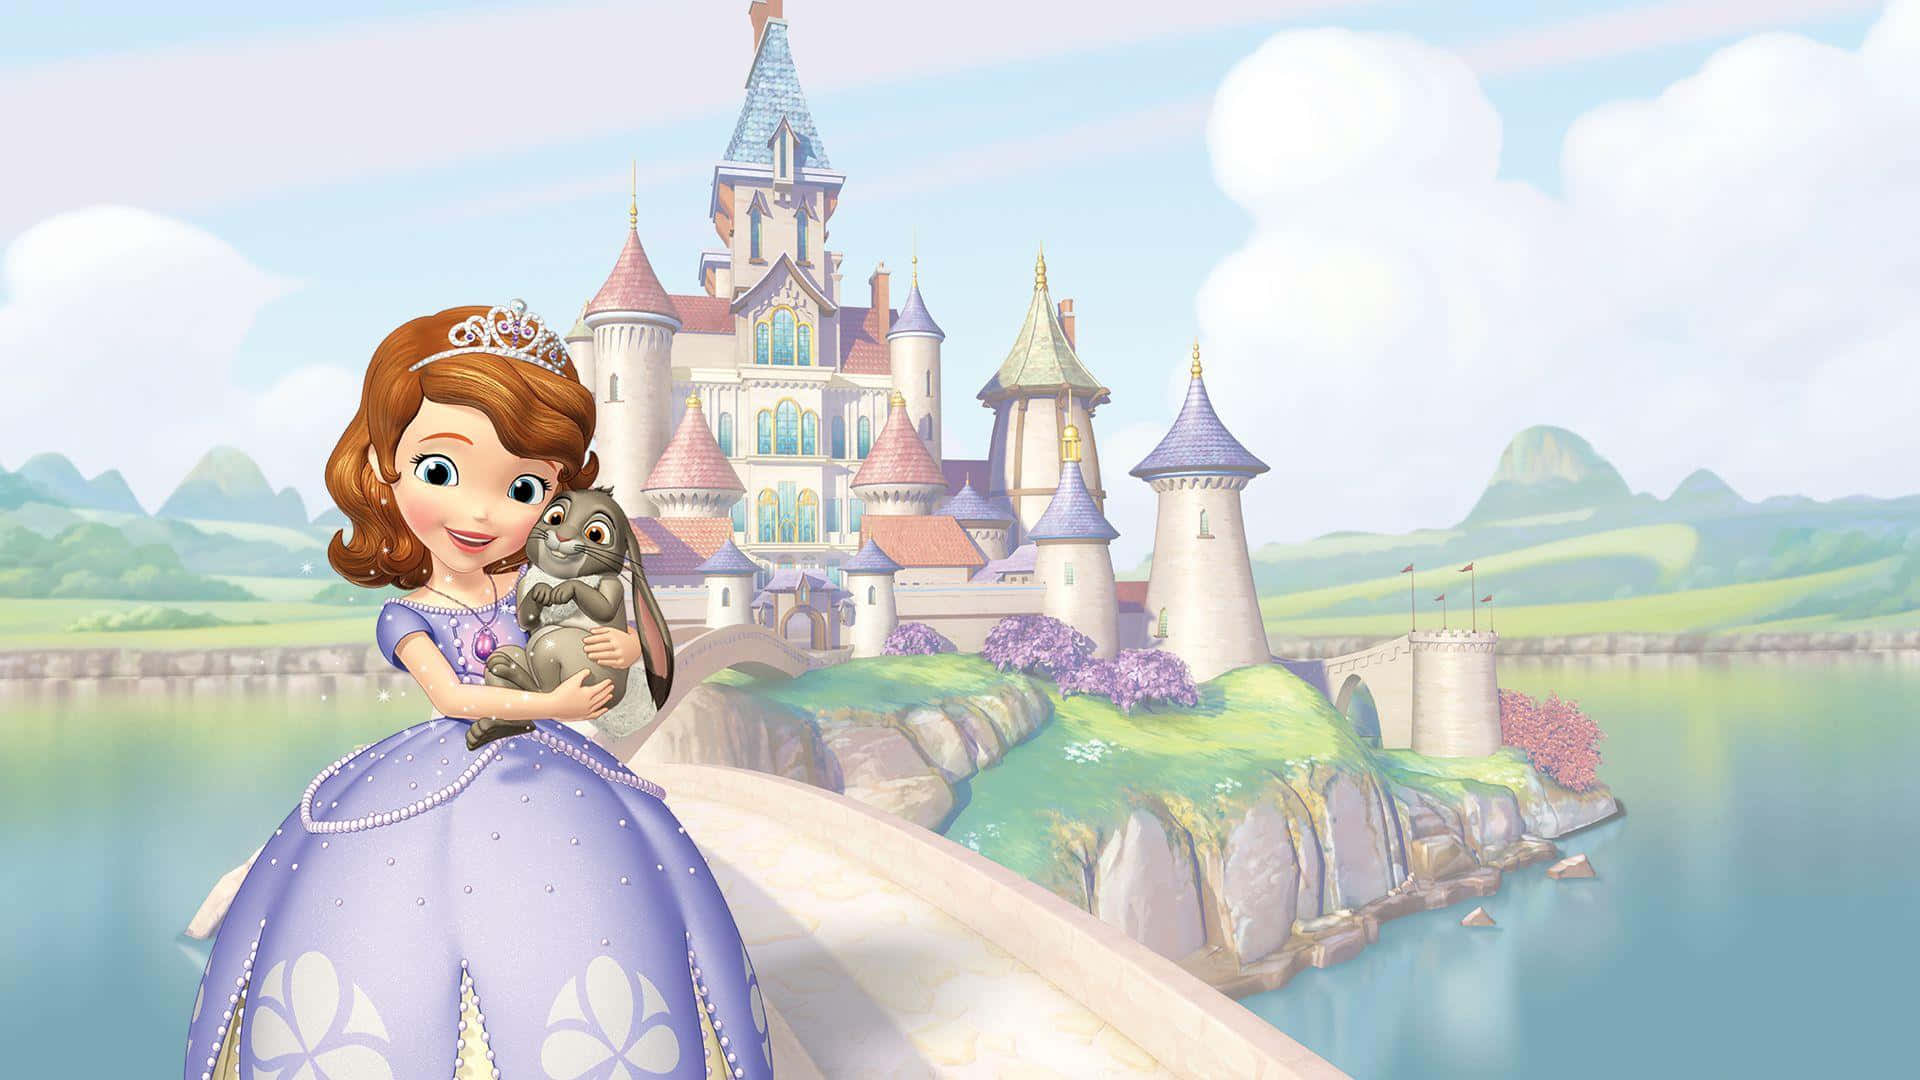 Sofia the first enjoys quality time with her family Wallpaper